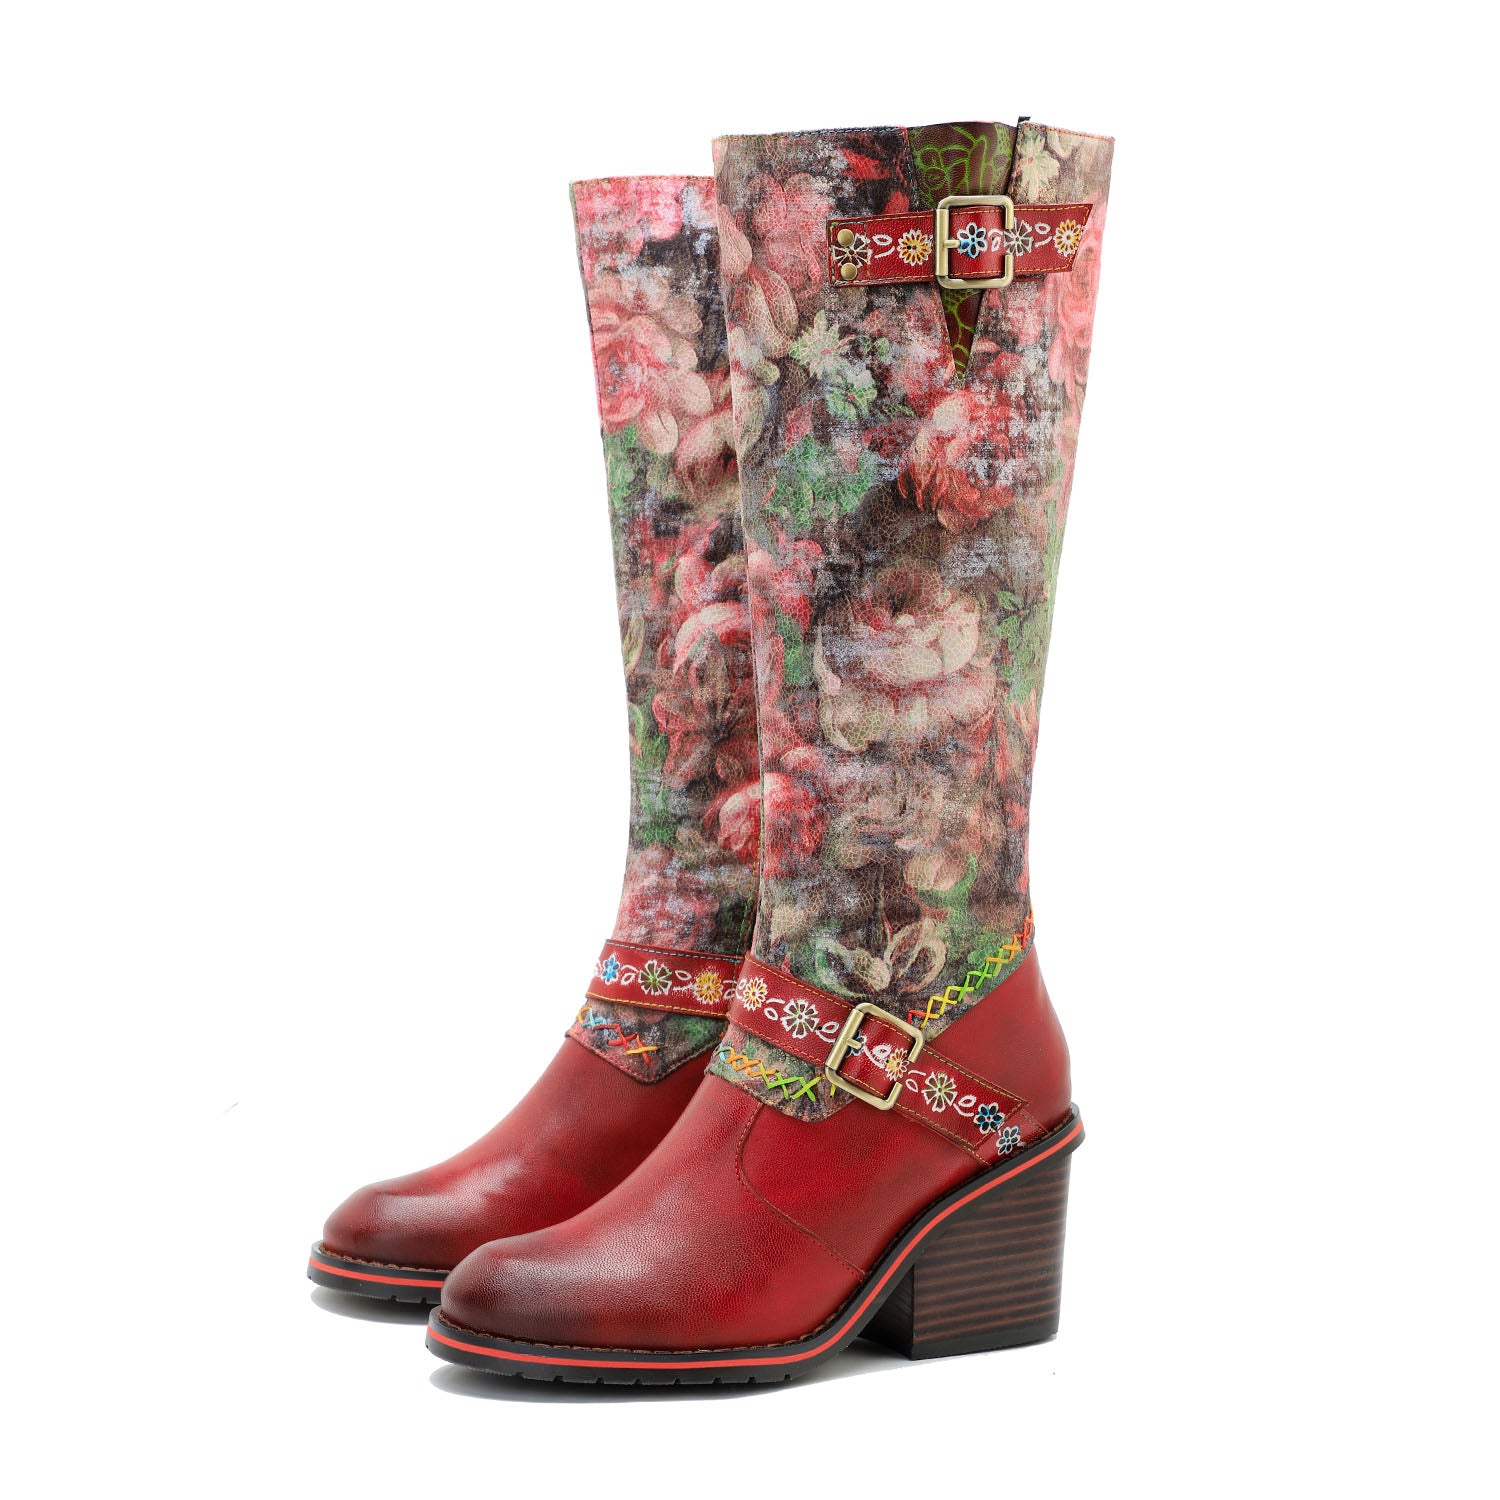 Women'sVintage Printed Hand-made Floral Boots